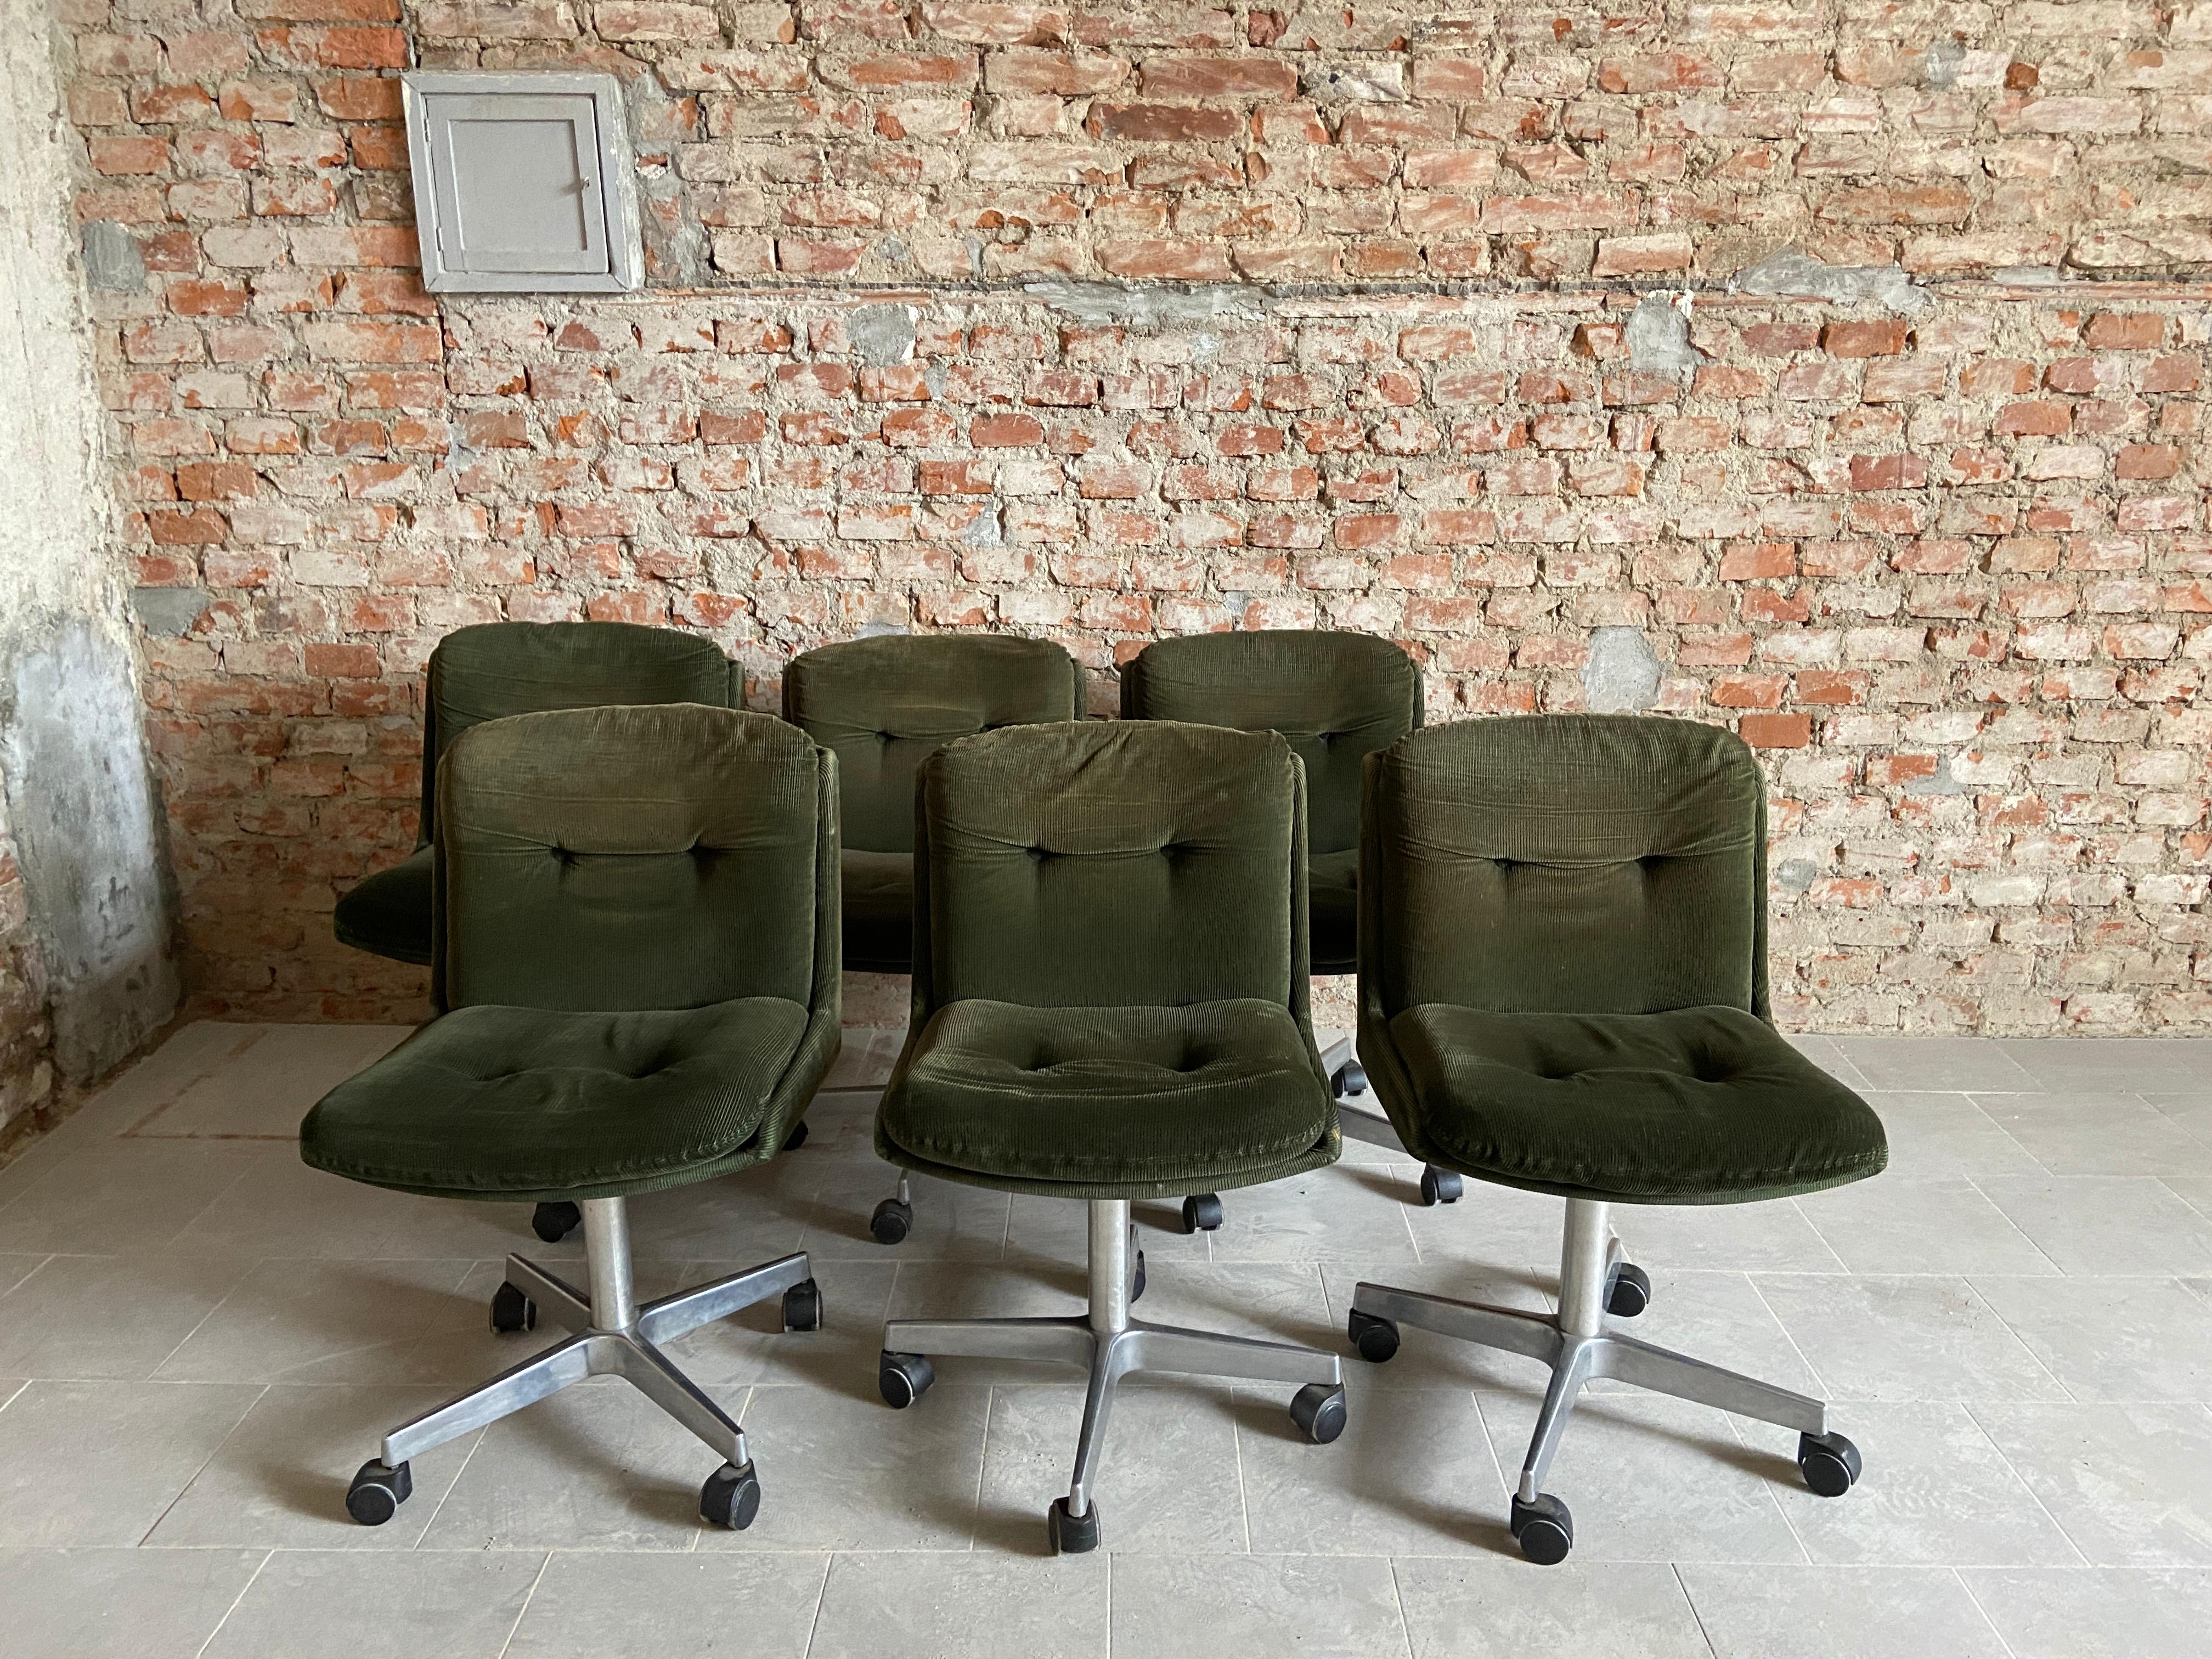 Late 20th Century Midcentury Italian Set of 6 Chairs on Wheels with their Original Fabric, 1970s